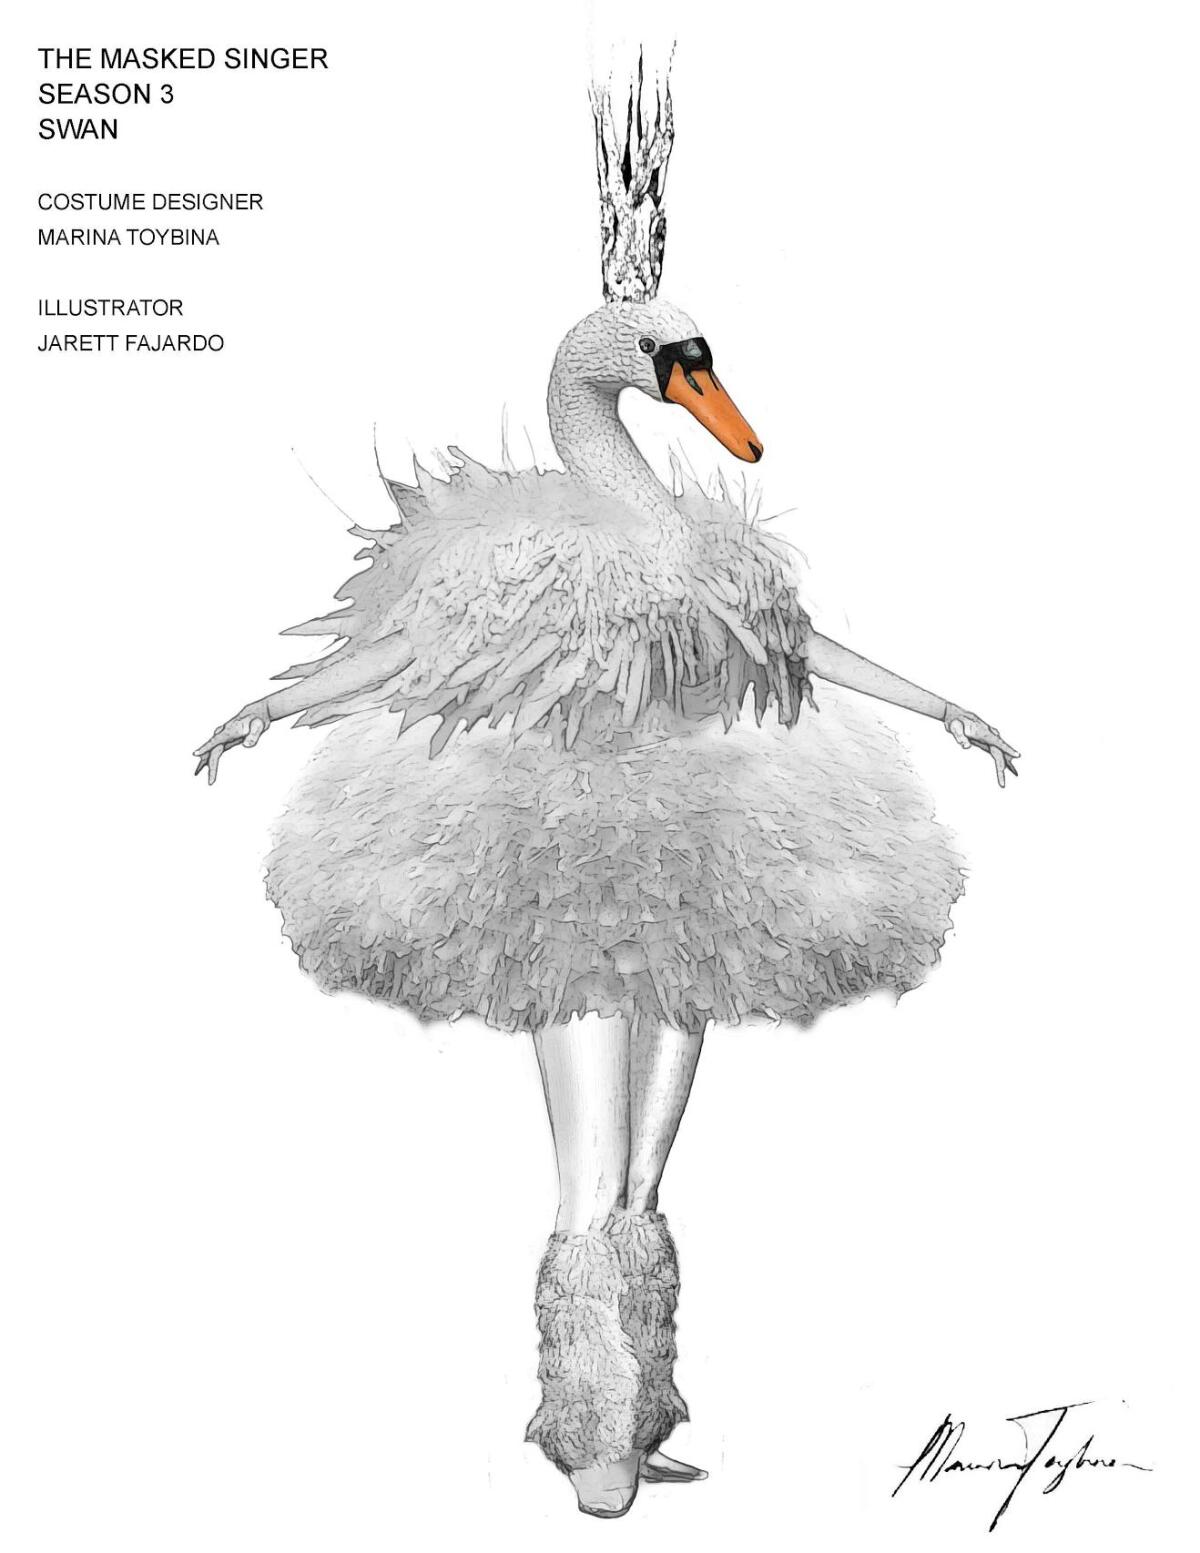 A swan costume sketch from "The Masked Singer"